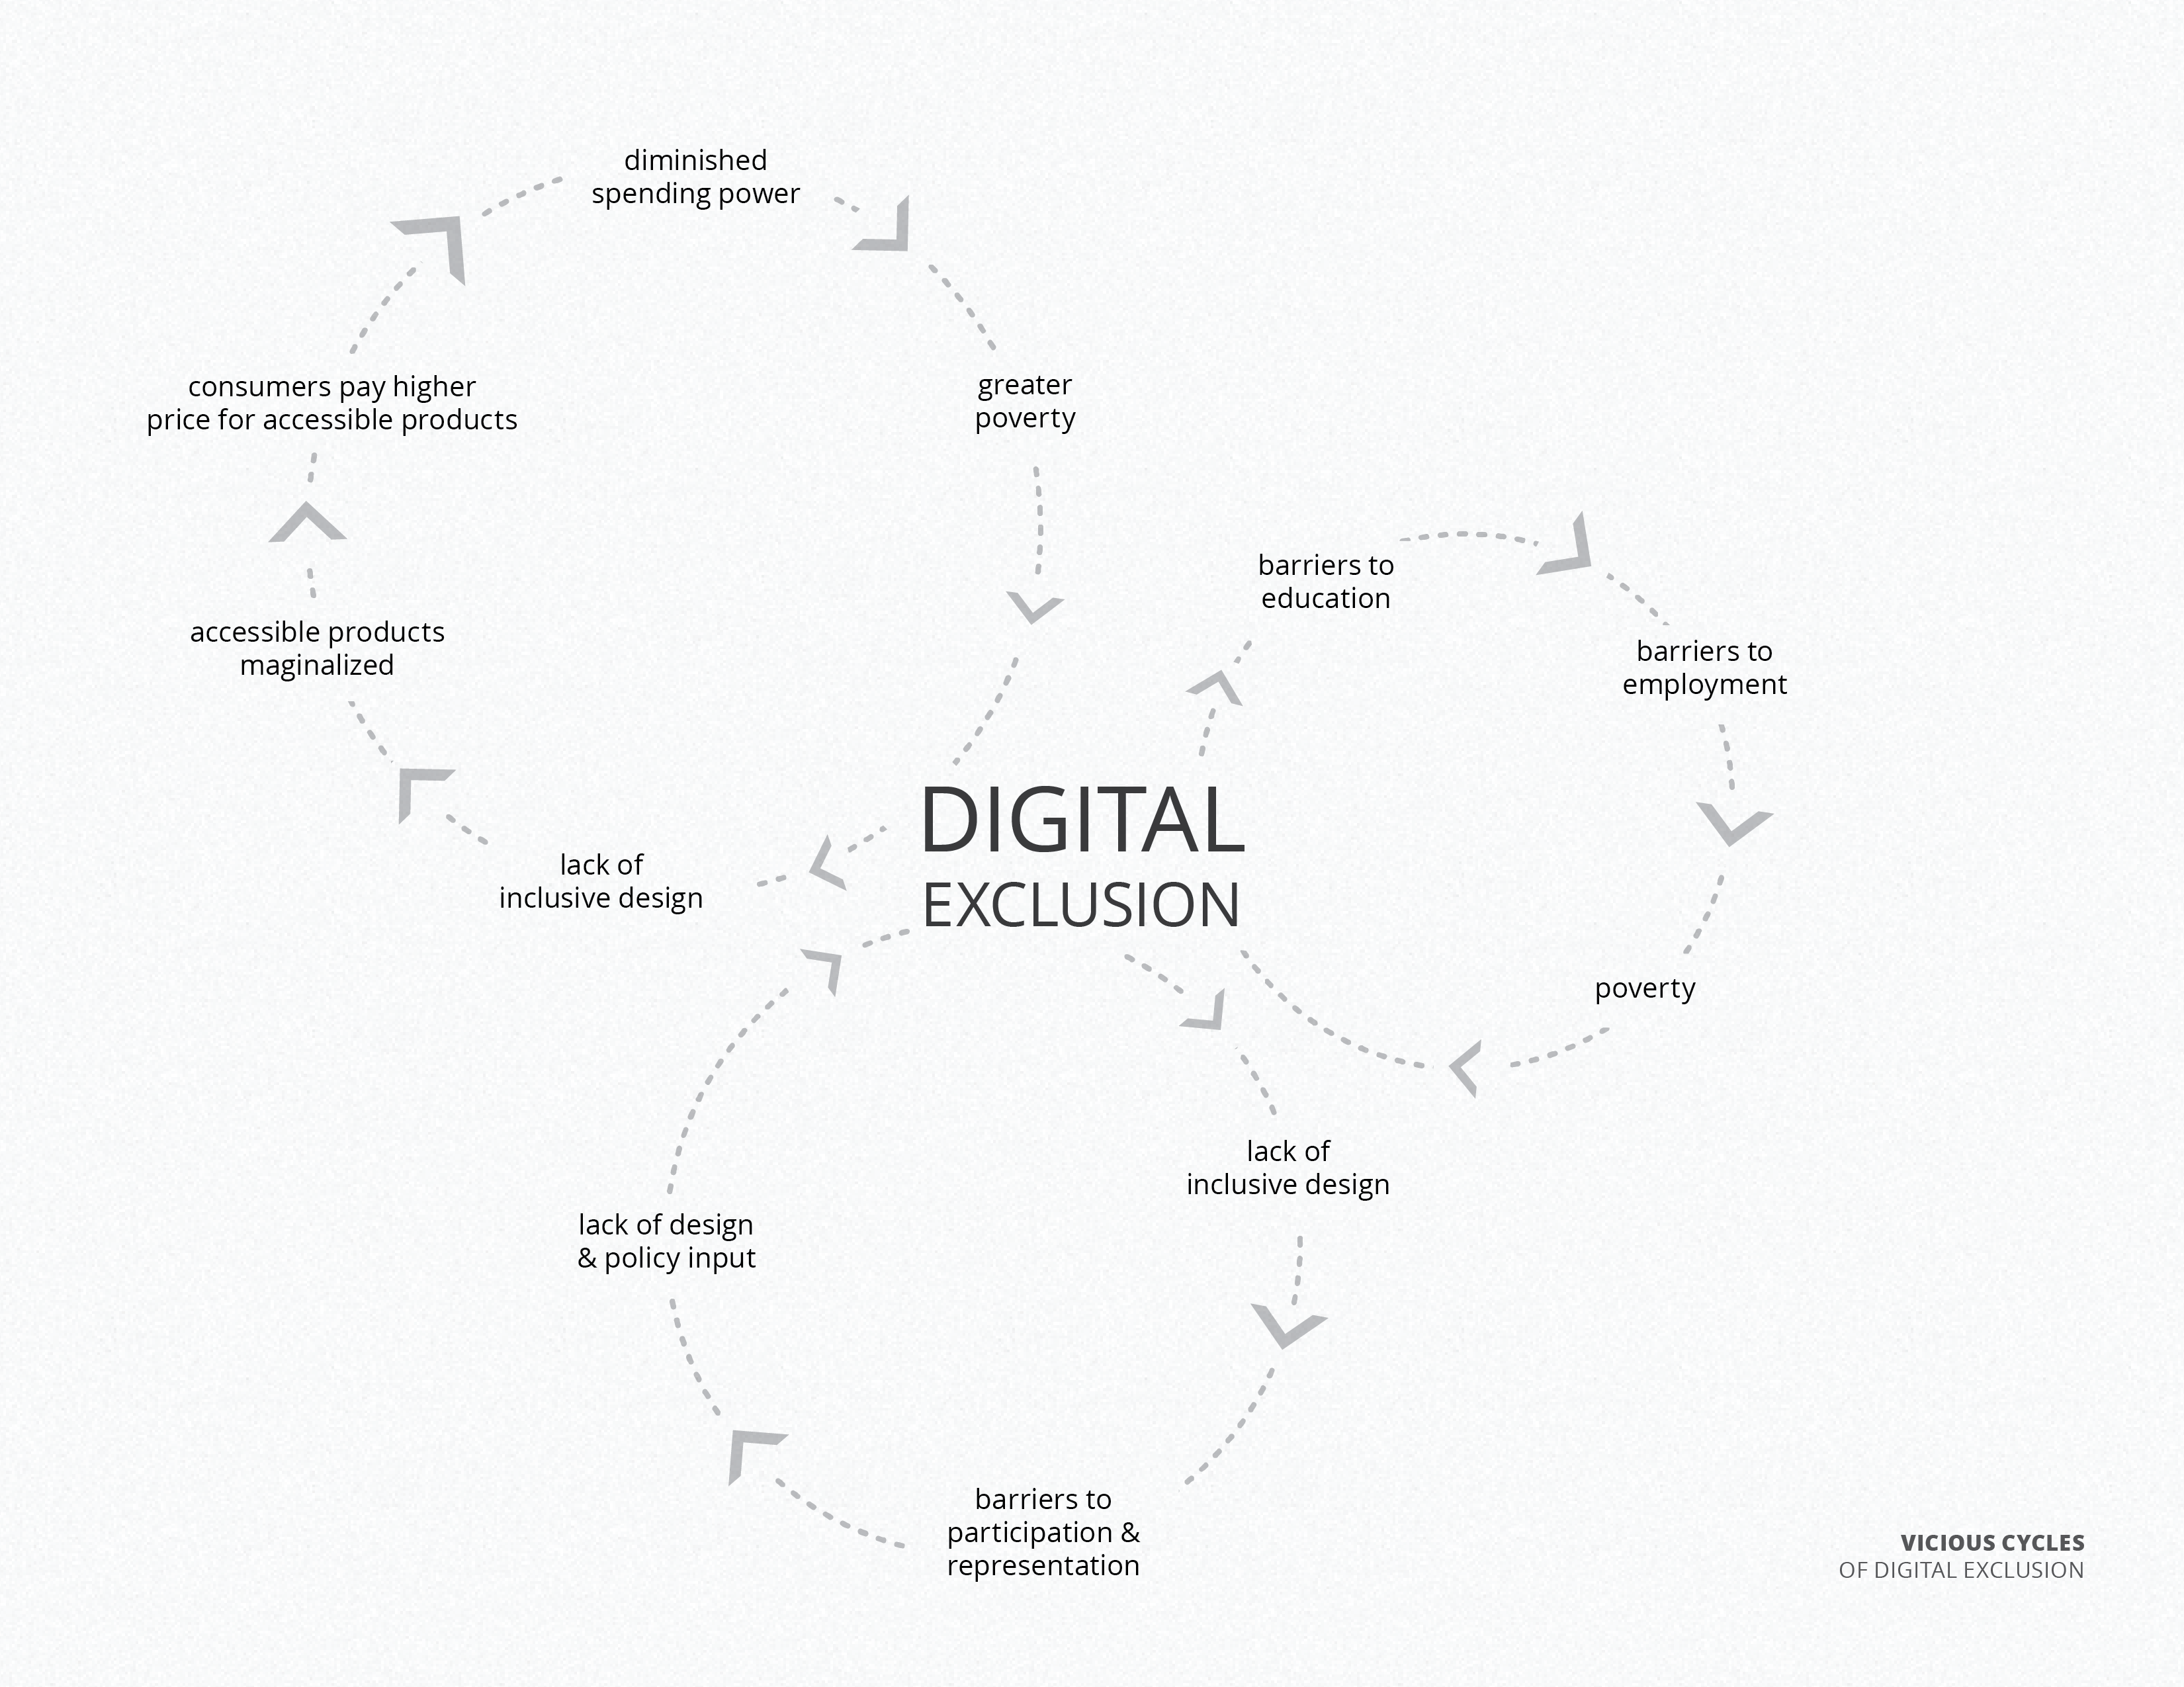 Figure 1. Vicious Cycle of Digital Exclusion”